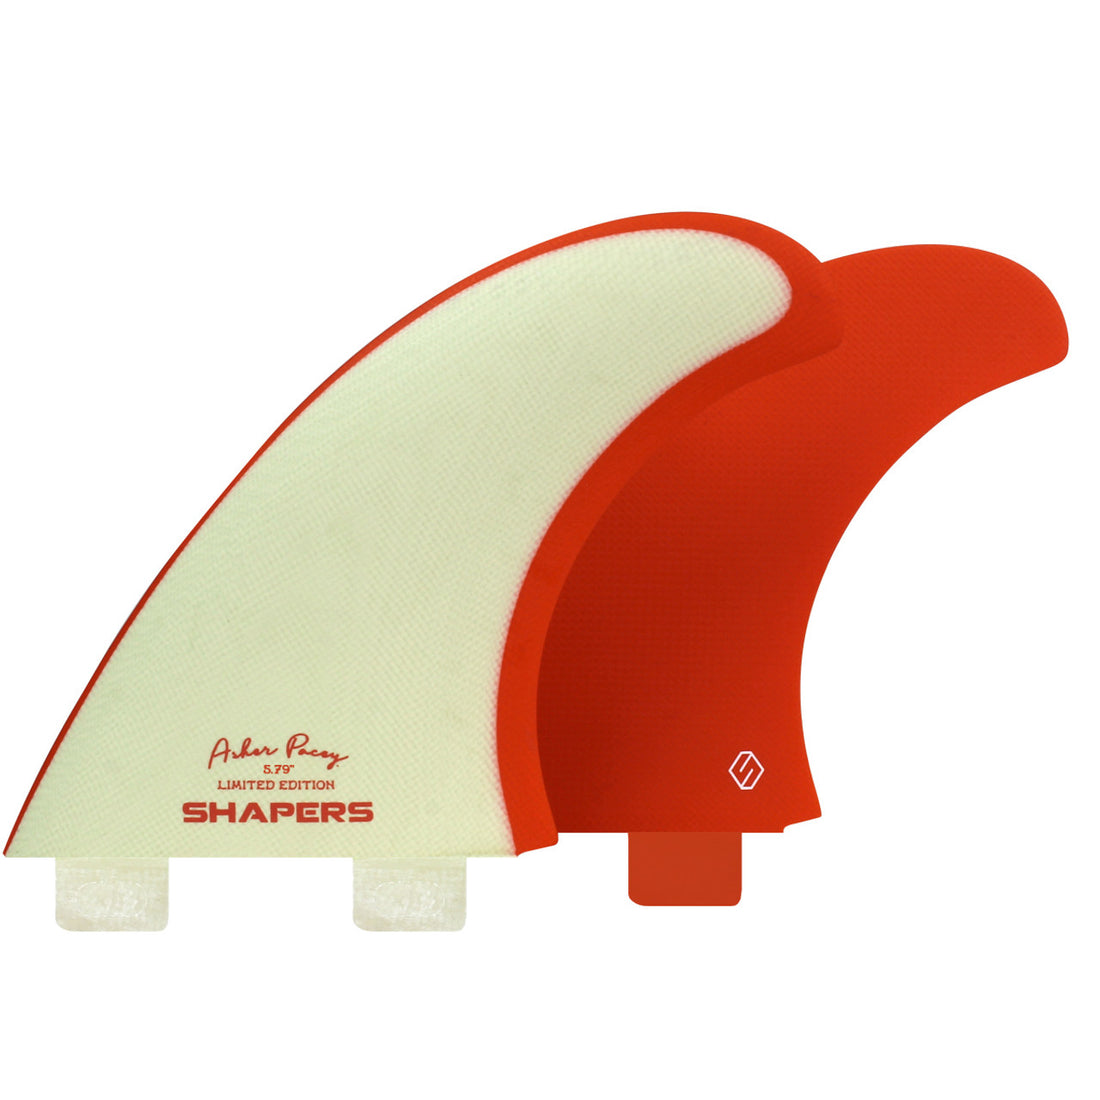 Shapers Fins - AP 5.79" (FCS1) Asher Pacey Twin Fins + Trailer - Orange